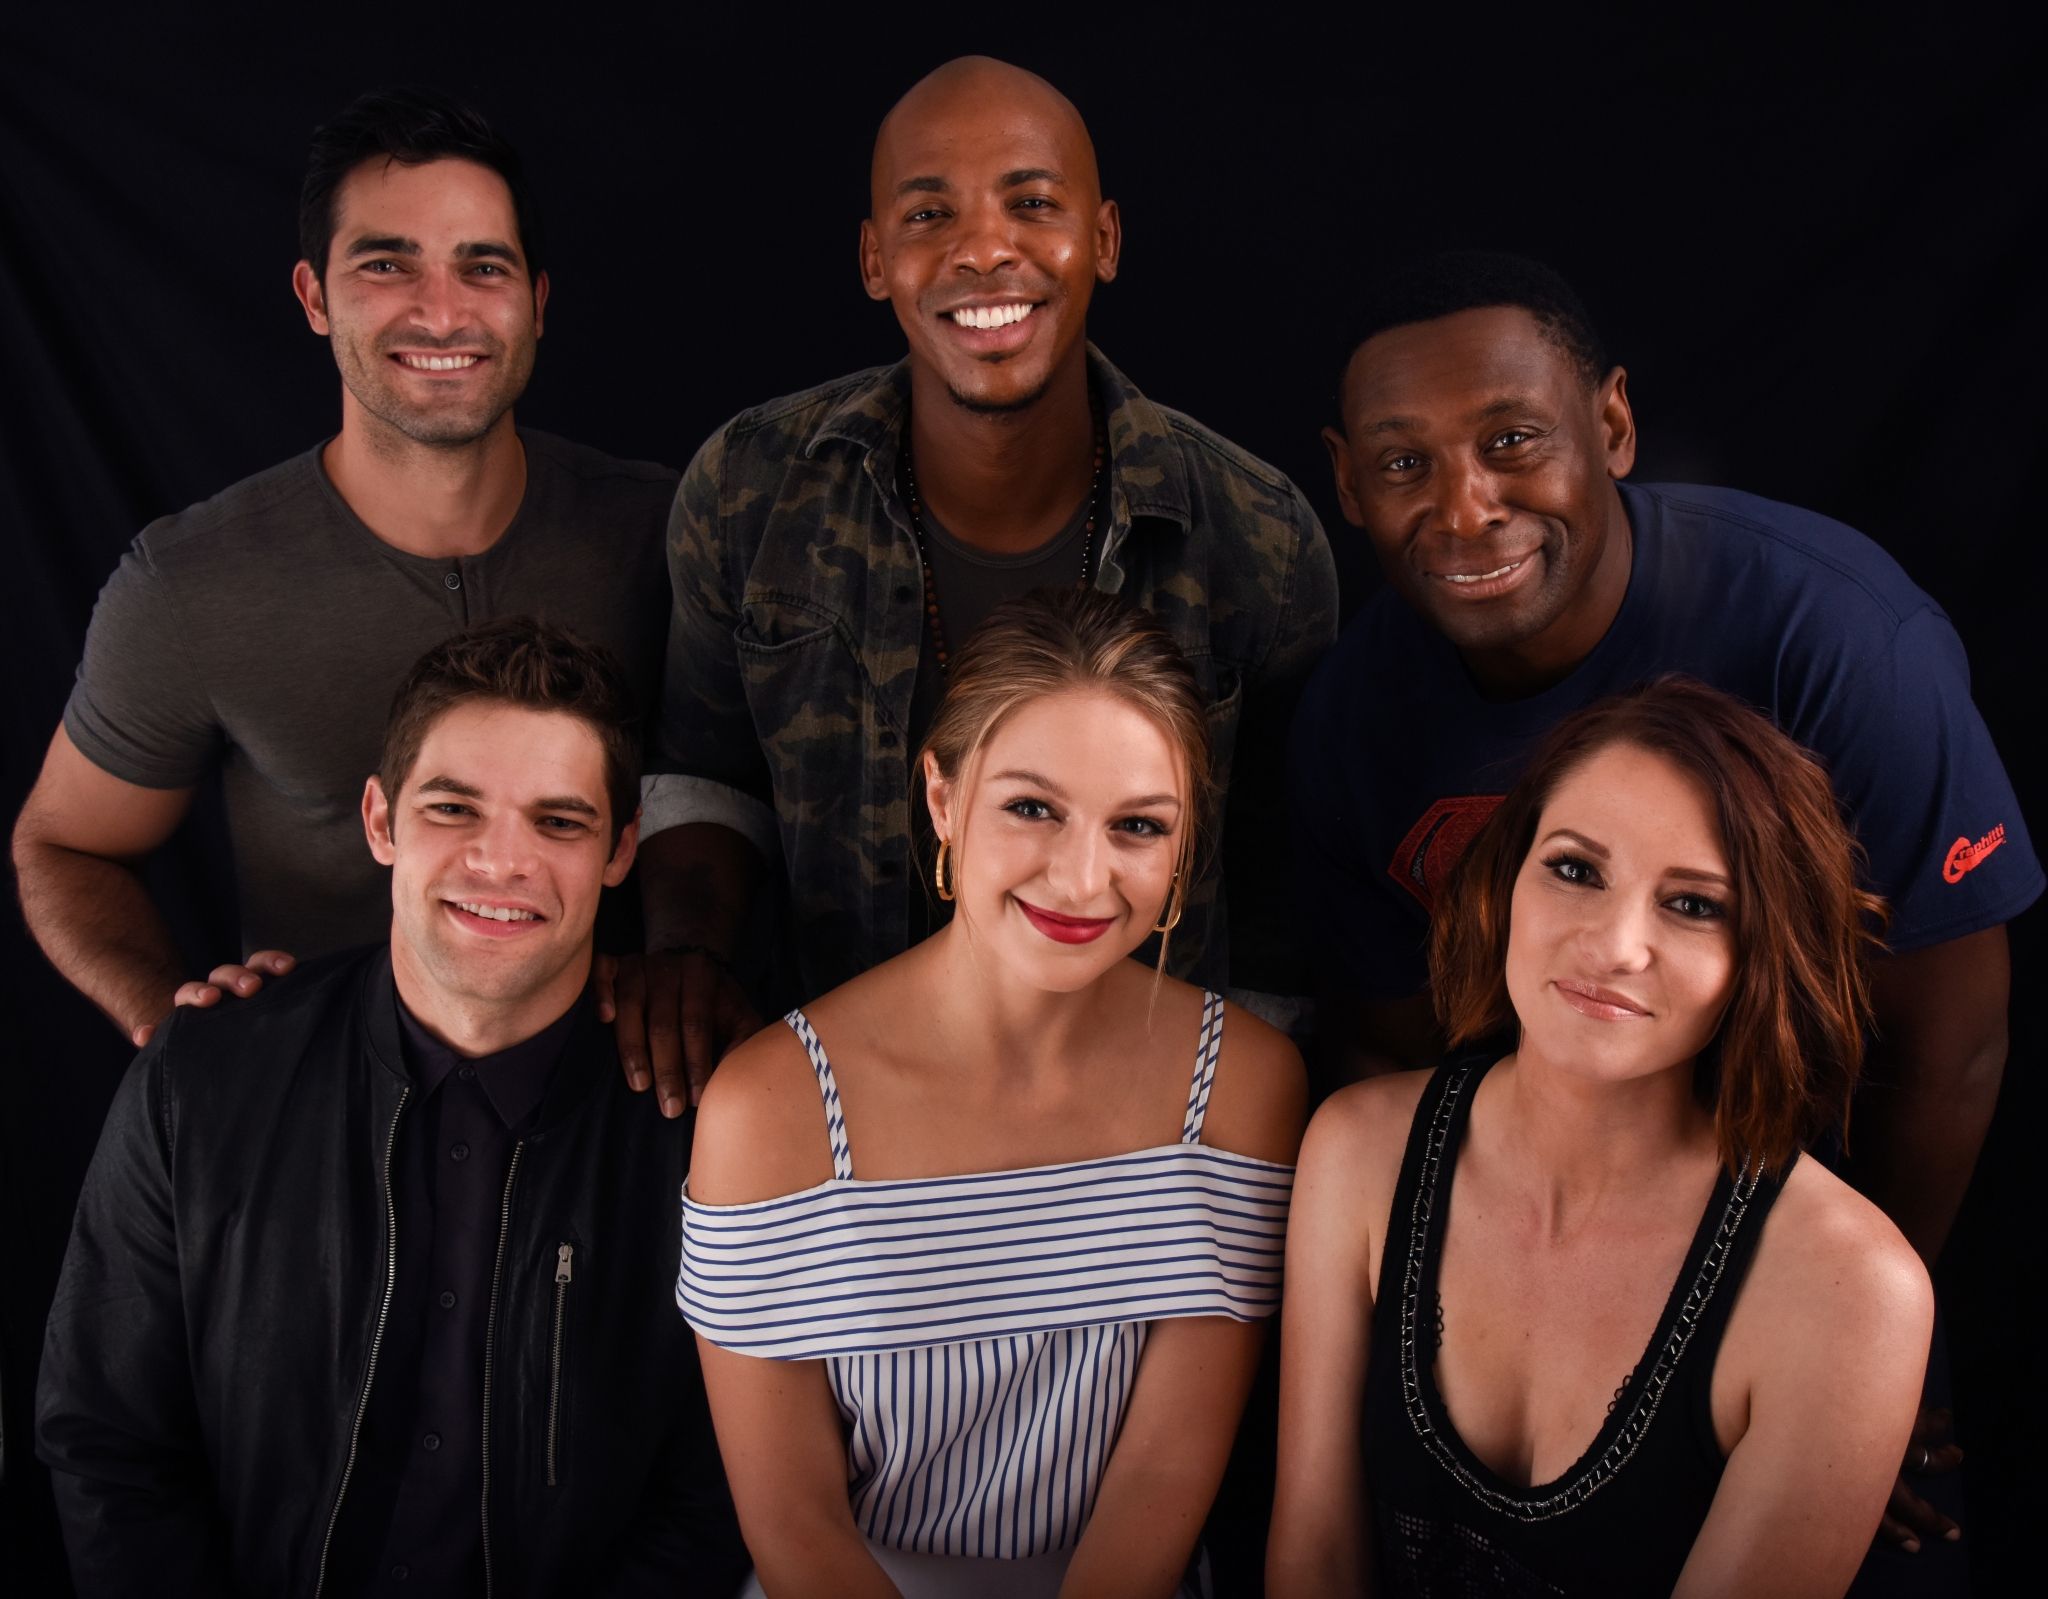 Melissa Benoist and the Supergirl cast.